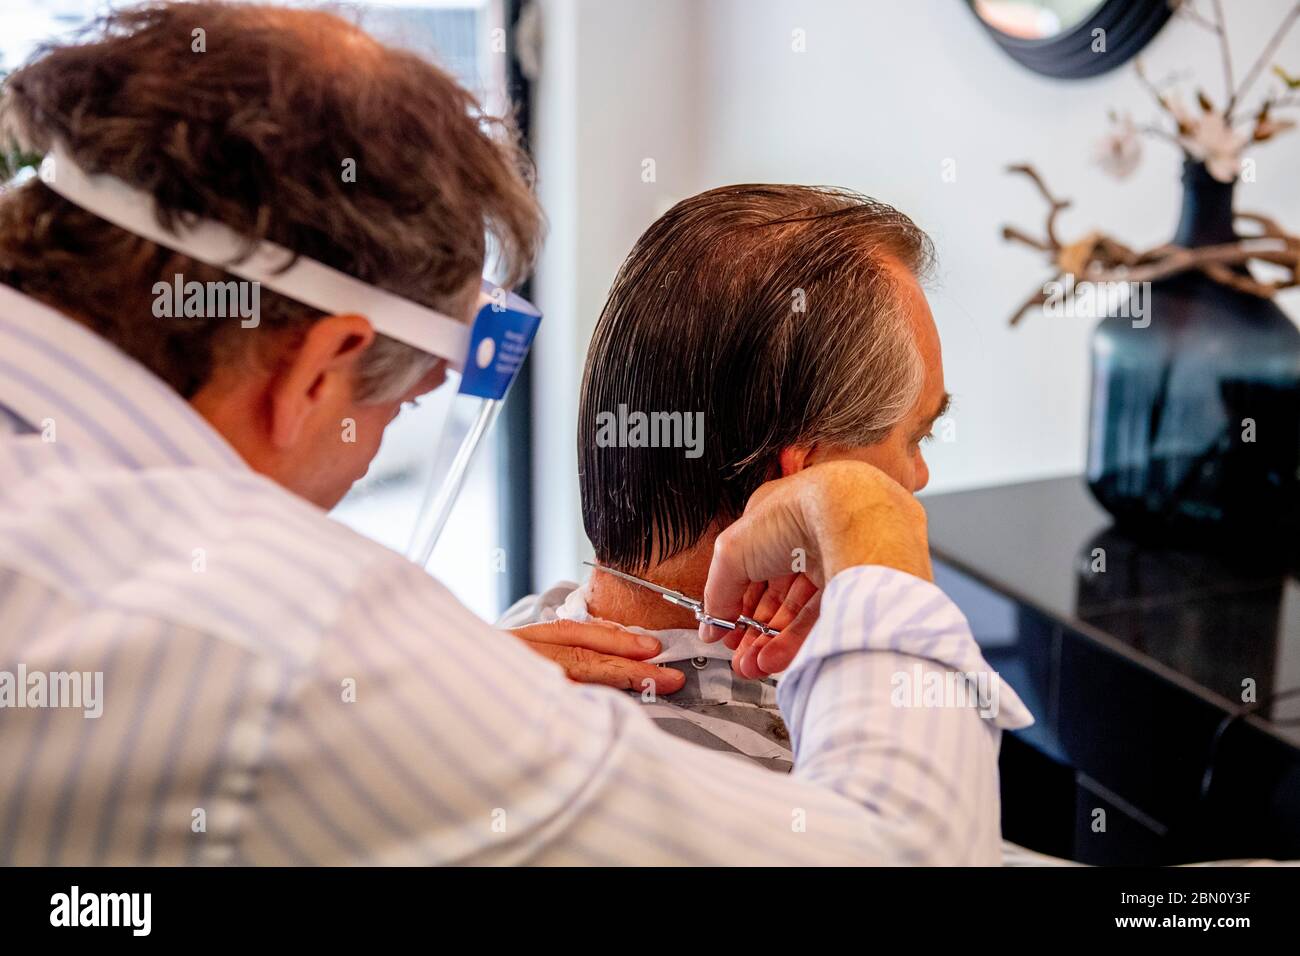 Rotterdam, Netherlands. 11th May, 2020. Ramon Brakman of Kap salon at the Westersingel cuts a clients hair on the first day that salons and barbershops were permitted to reopen amid the coronavirus pandemic. Credit: SOPA Images Limited/Alamy Live News Stock Photo